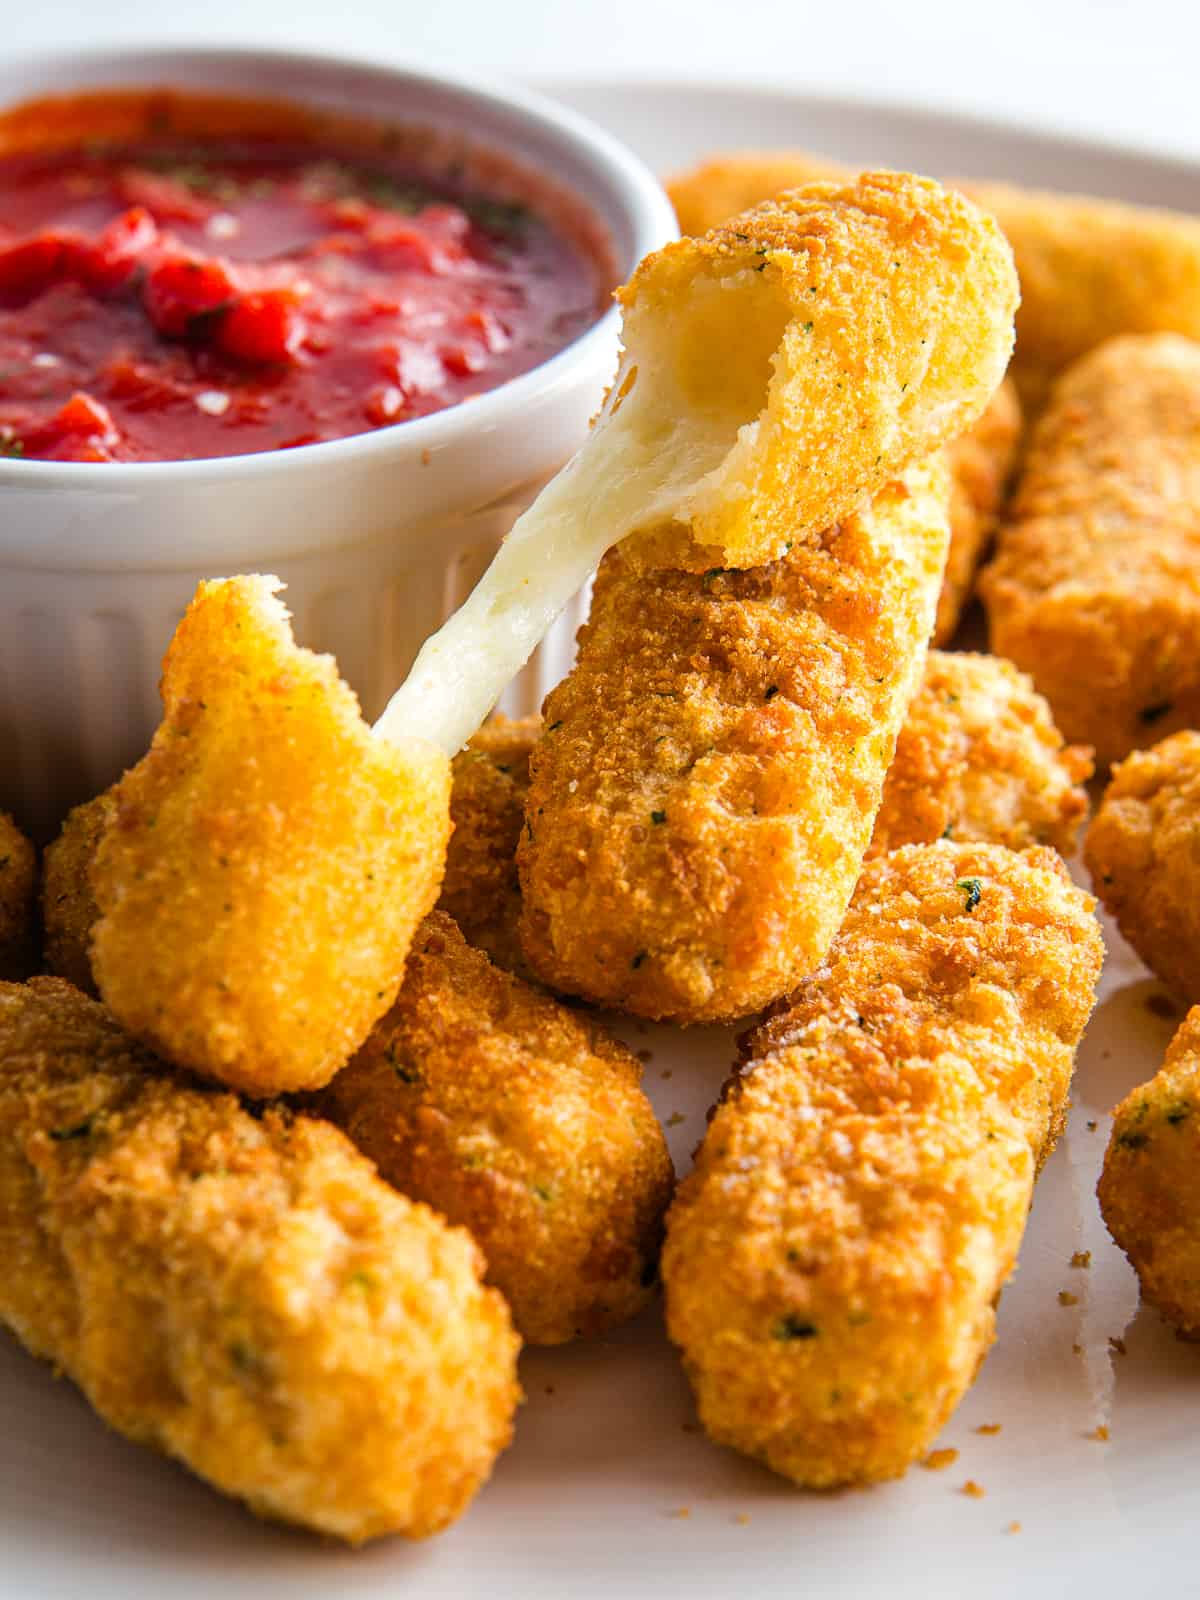 Gluten-free mozzarella sticks on a plate. A small bowl of tomato sauce is in the back.